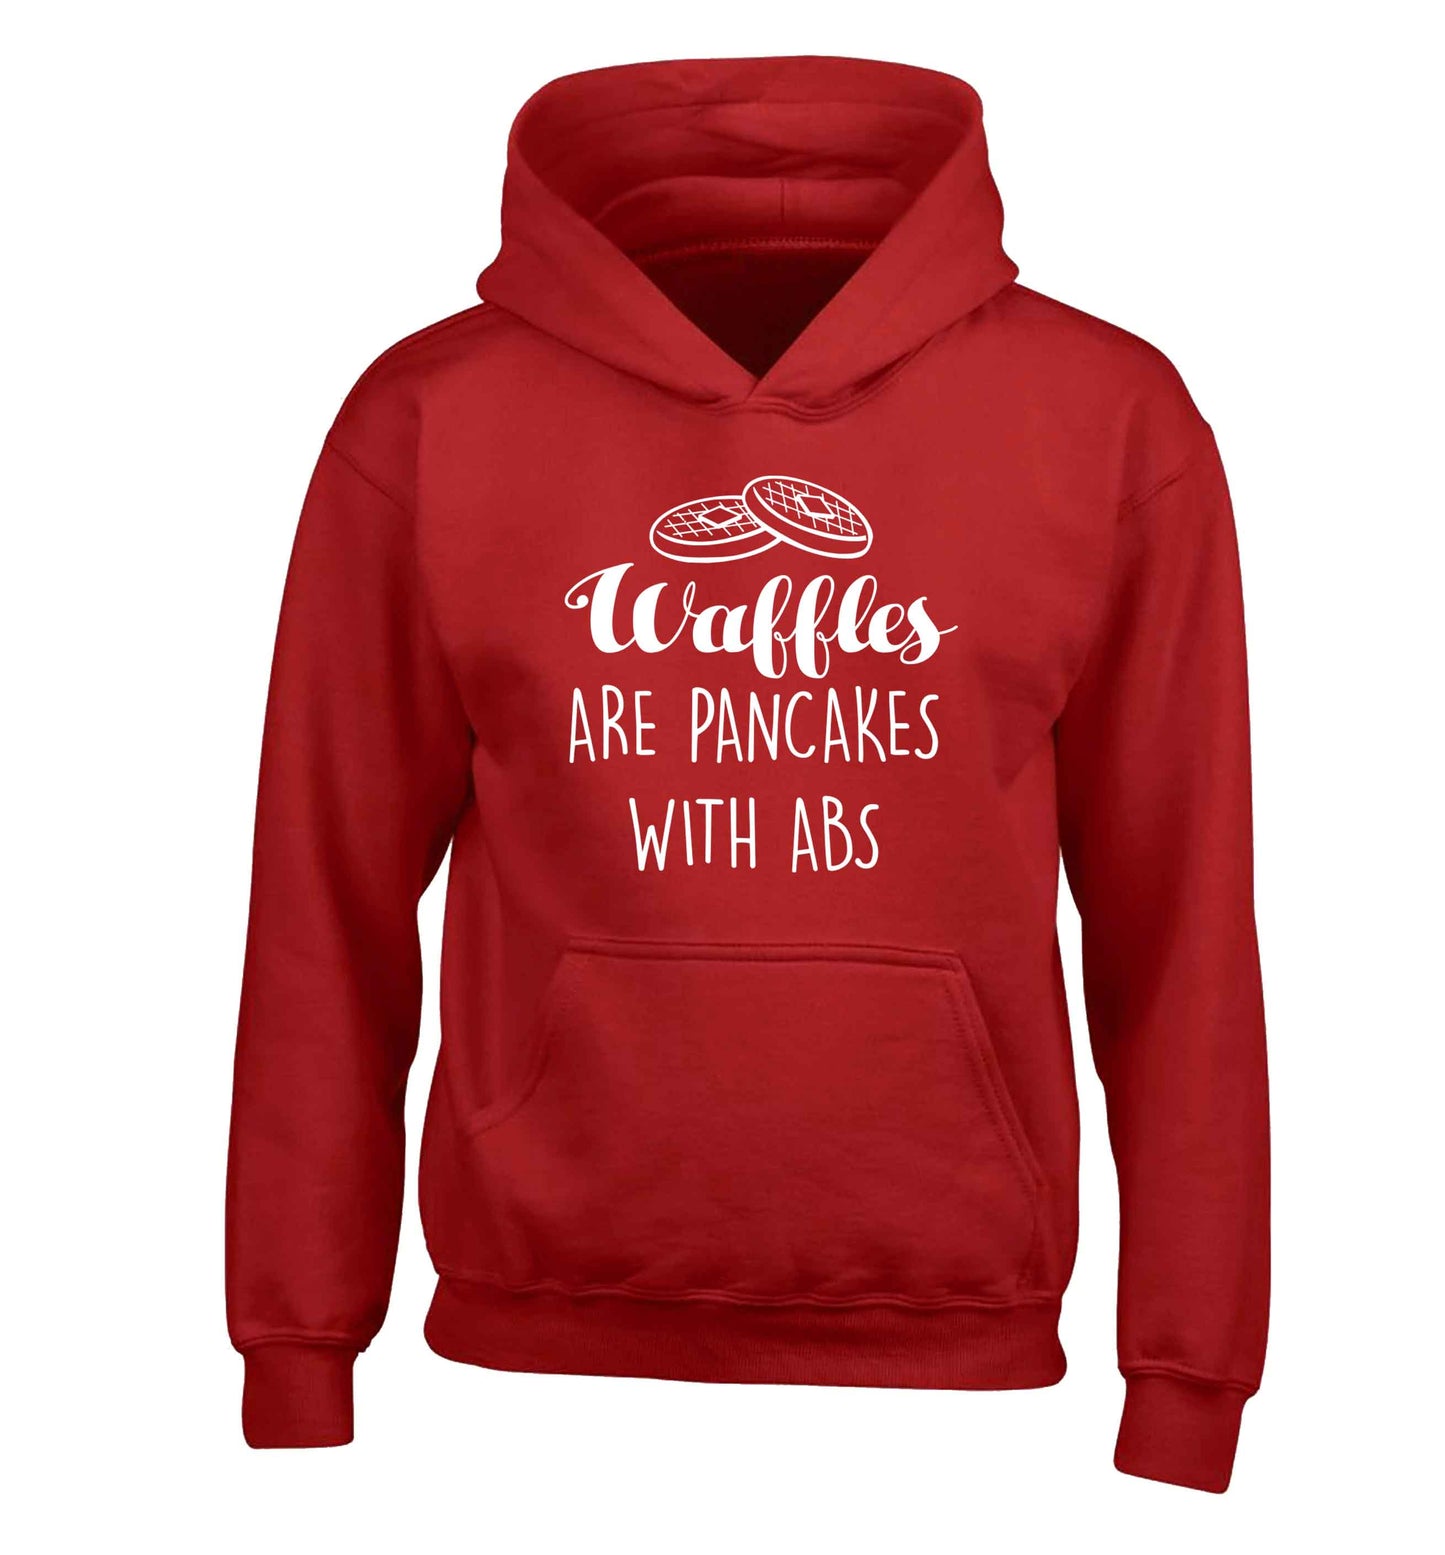 Waffles are just pancakes with abs children's red hoodie 12-13 Years